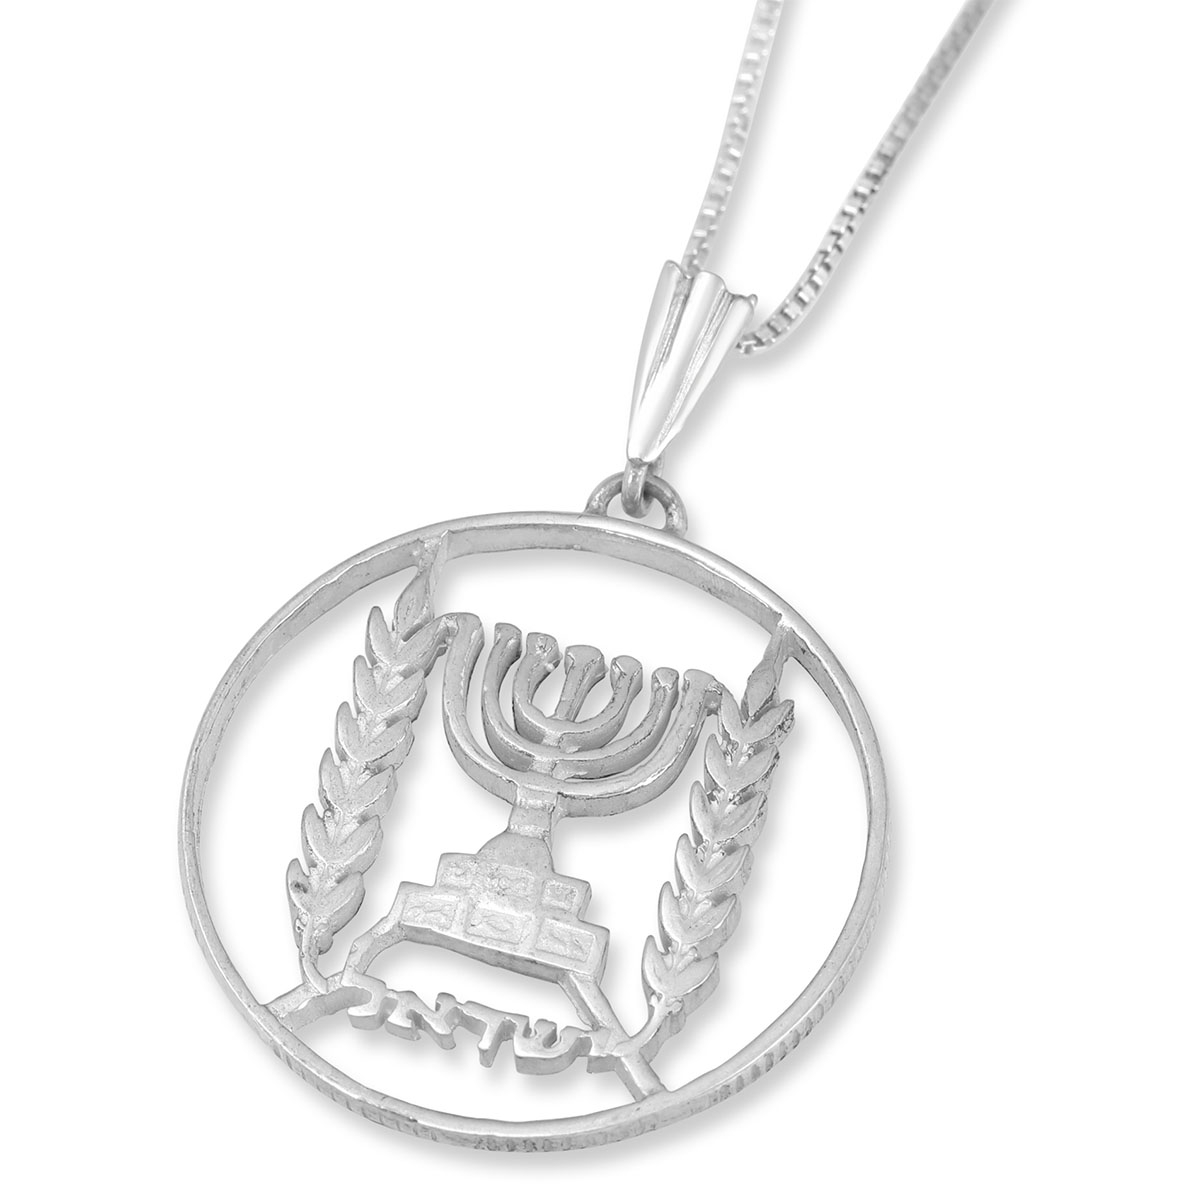 Half Israeli Lira Old Coin Sterling Silver Necklace - 1